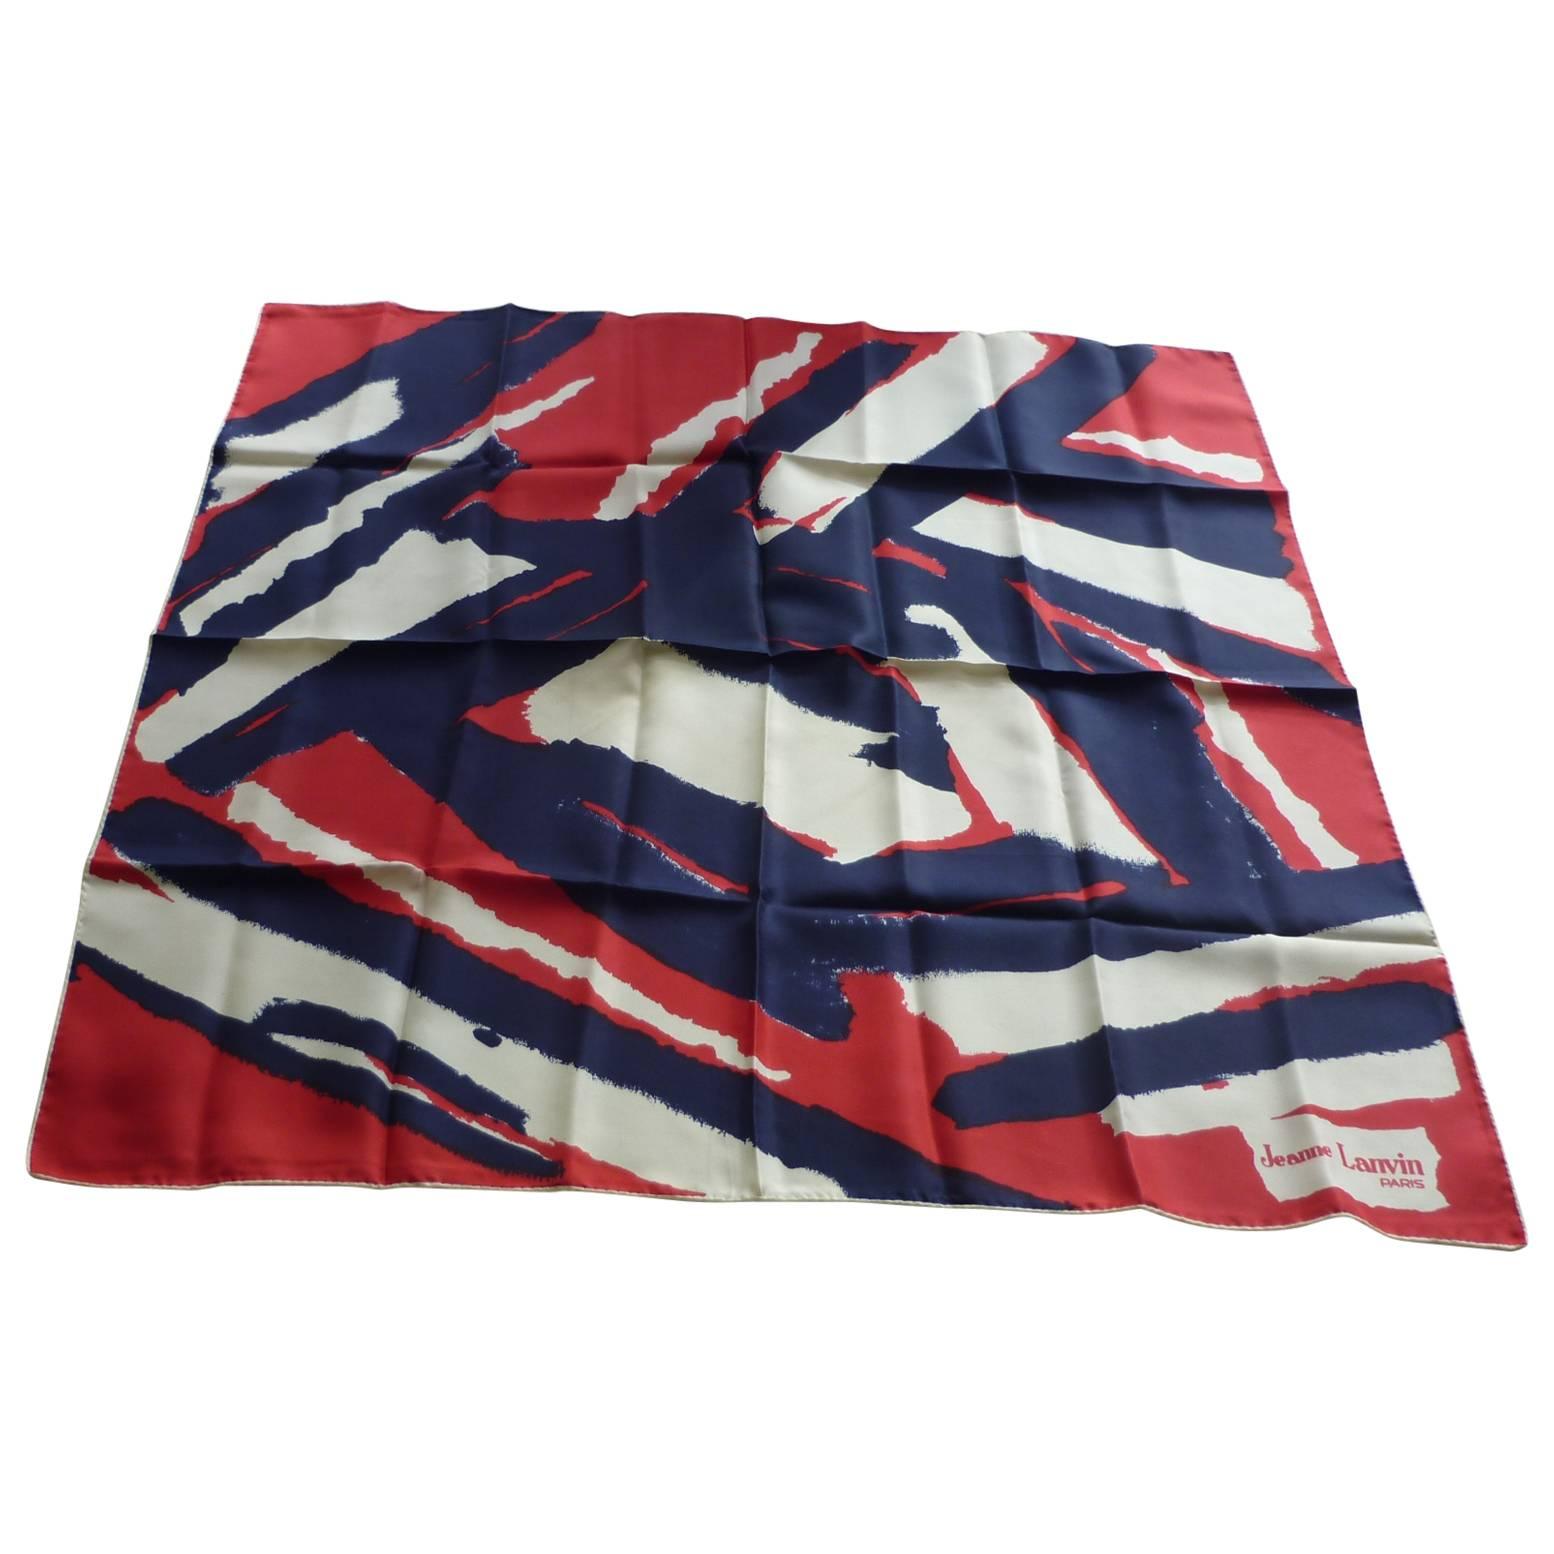 1970s Jeanne Lanvin Silk Scarf in Red, White and Blue 30.5x30"